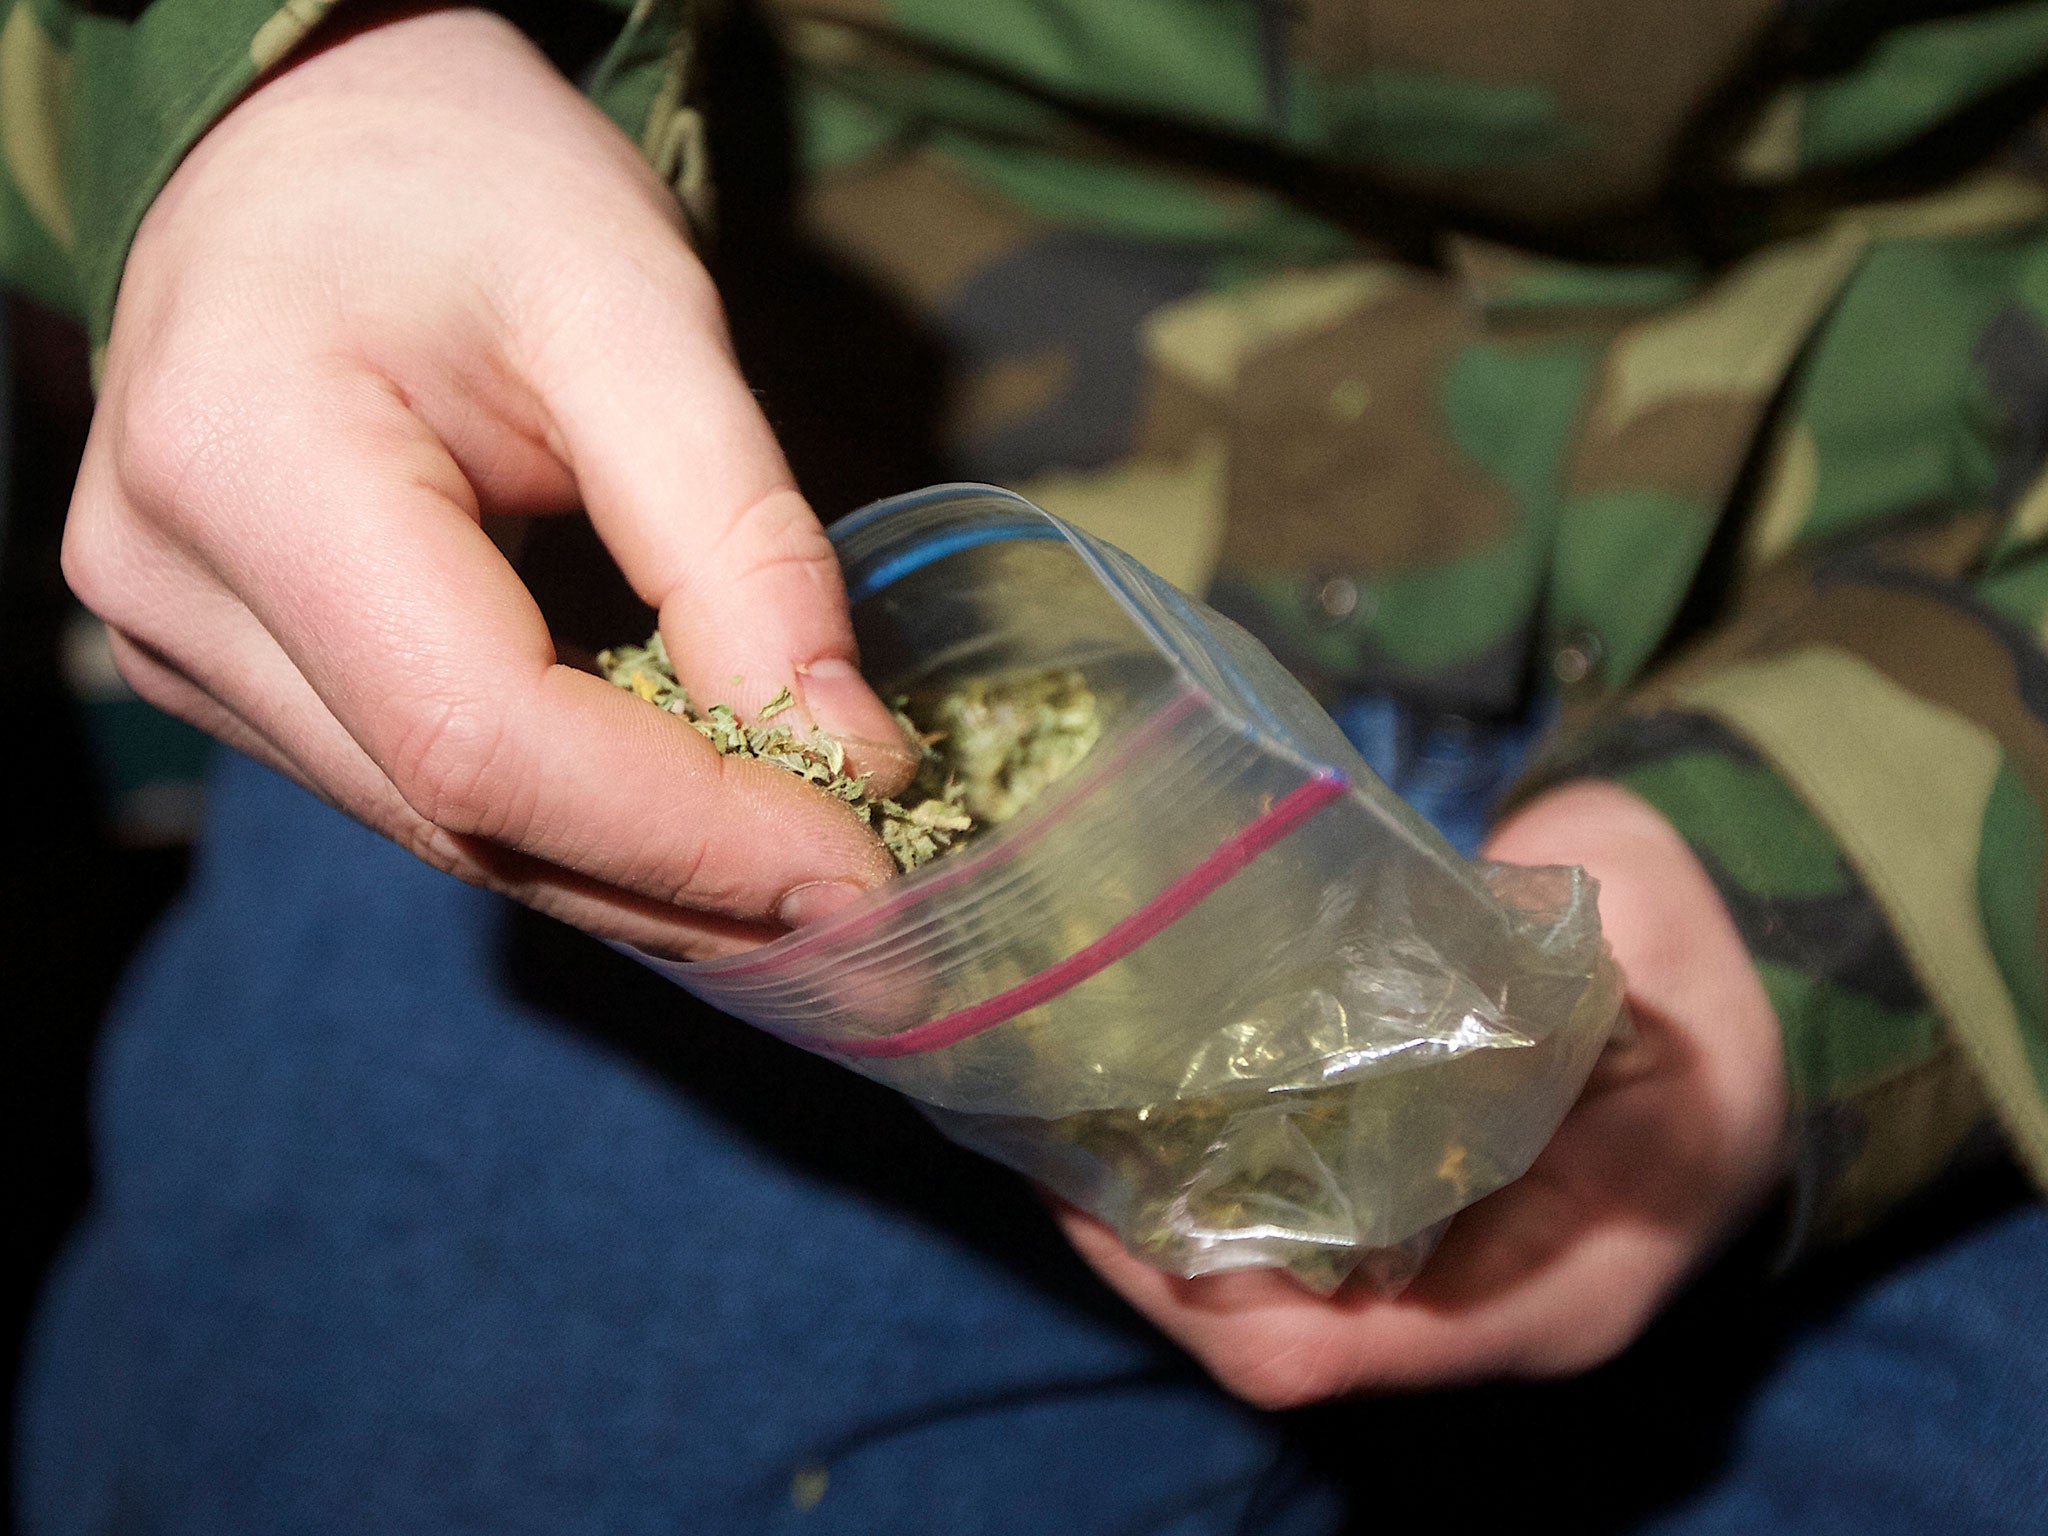 A Seattle resident takes marijuana from a plastic bag